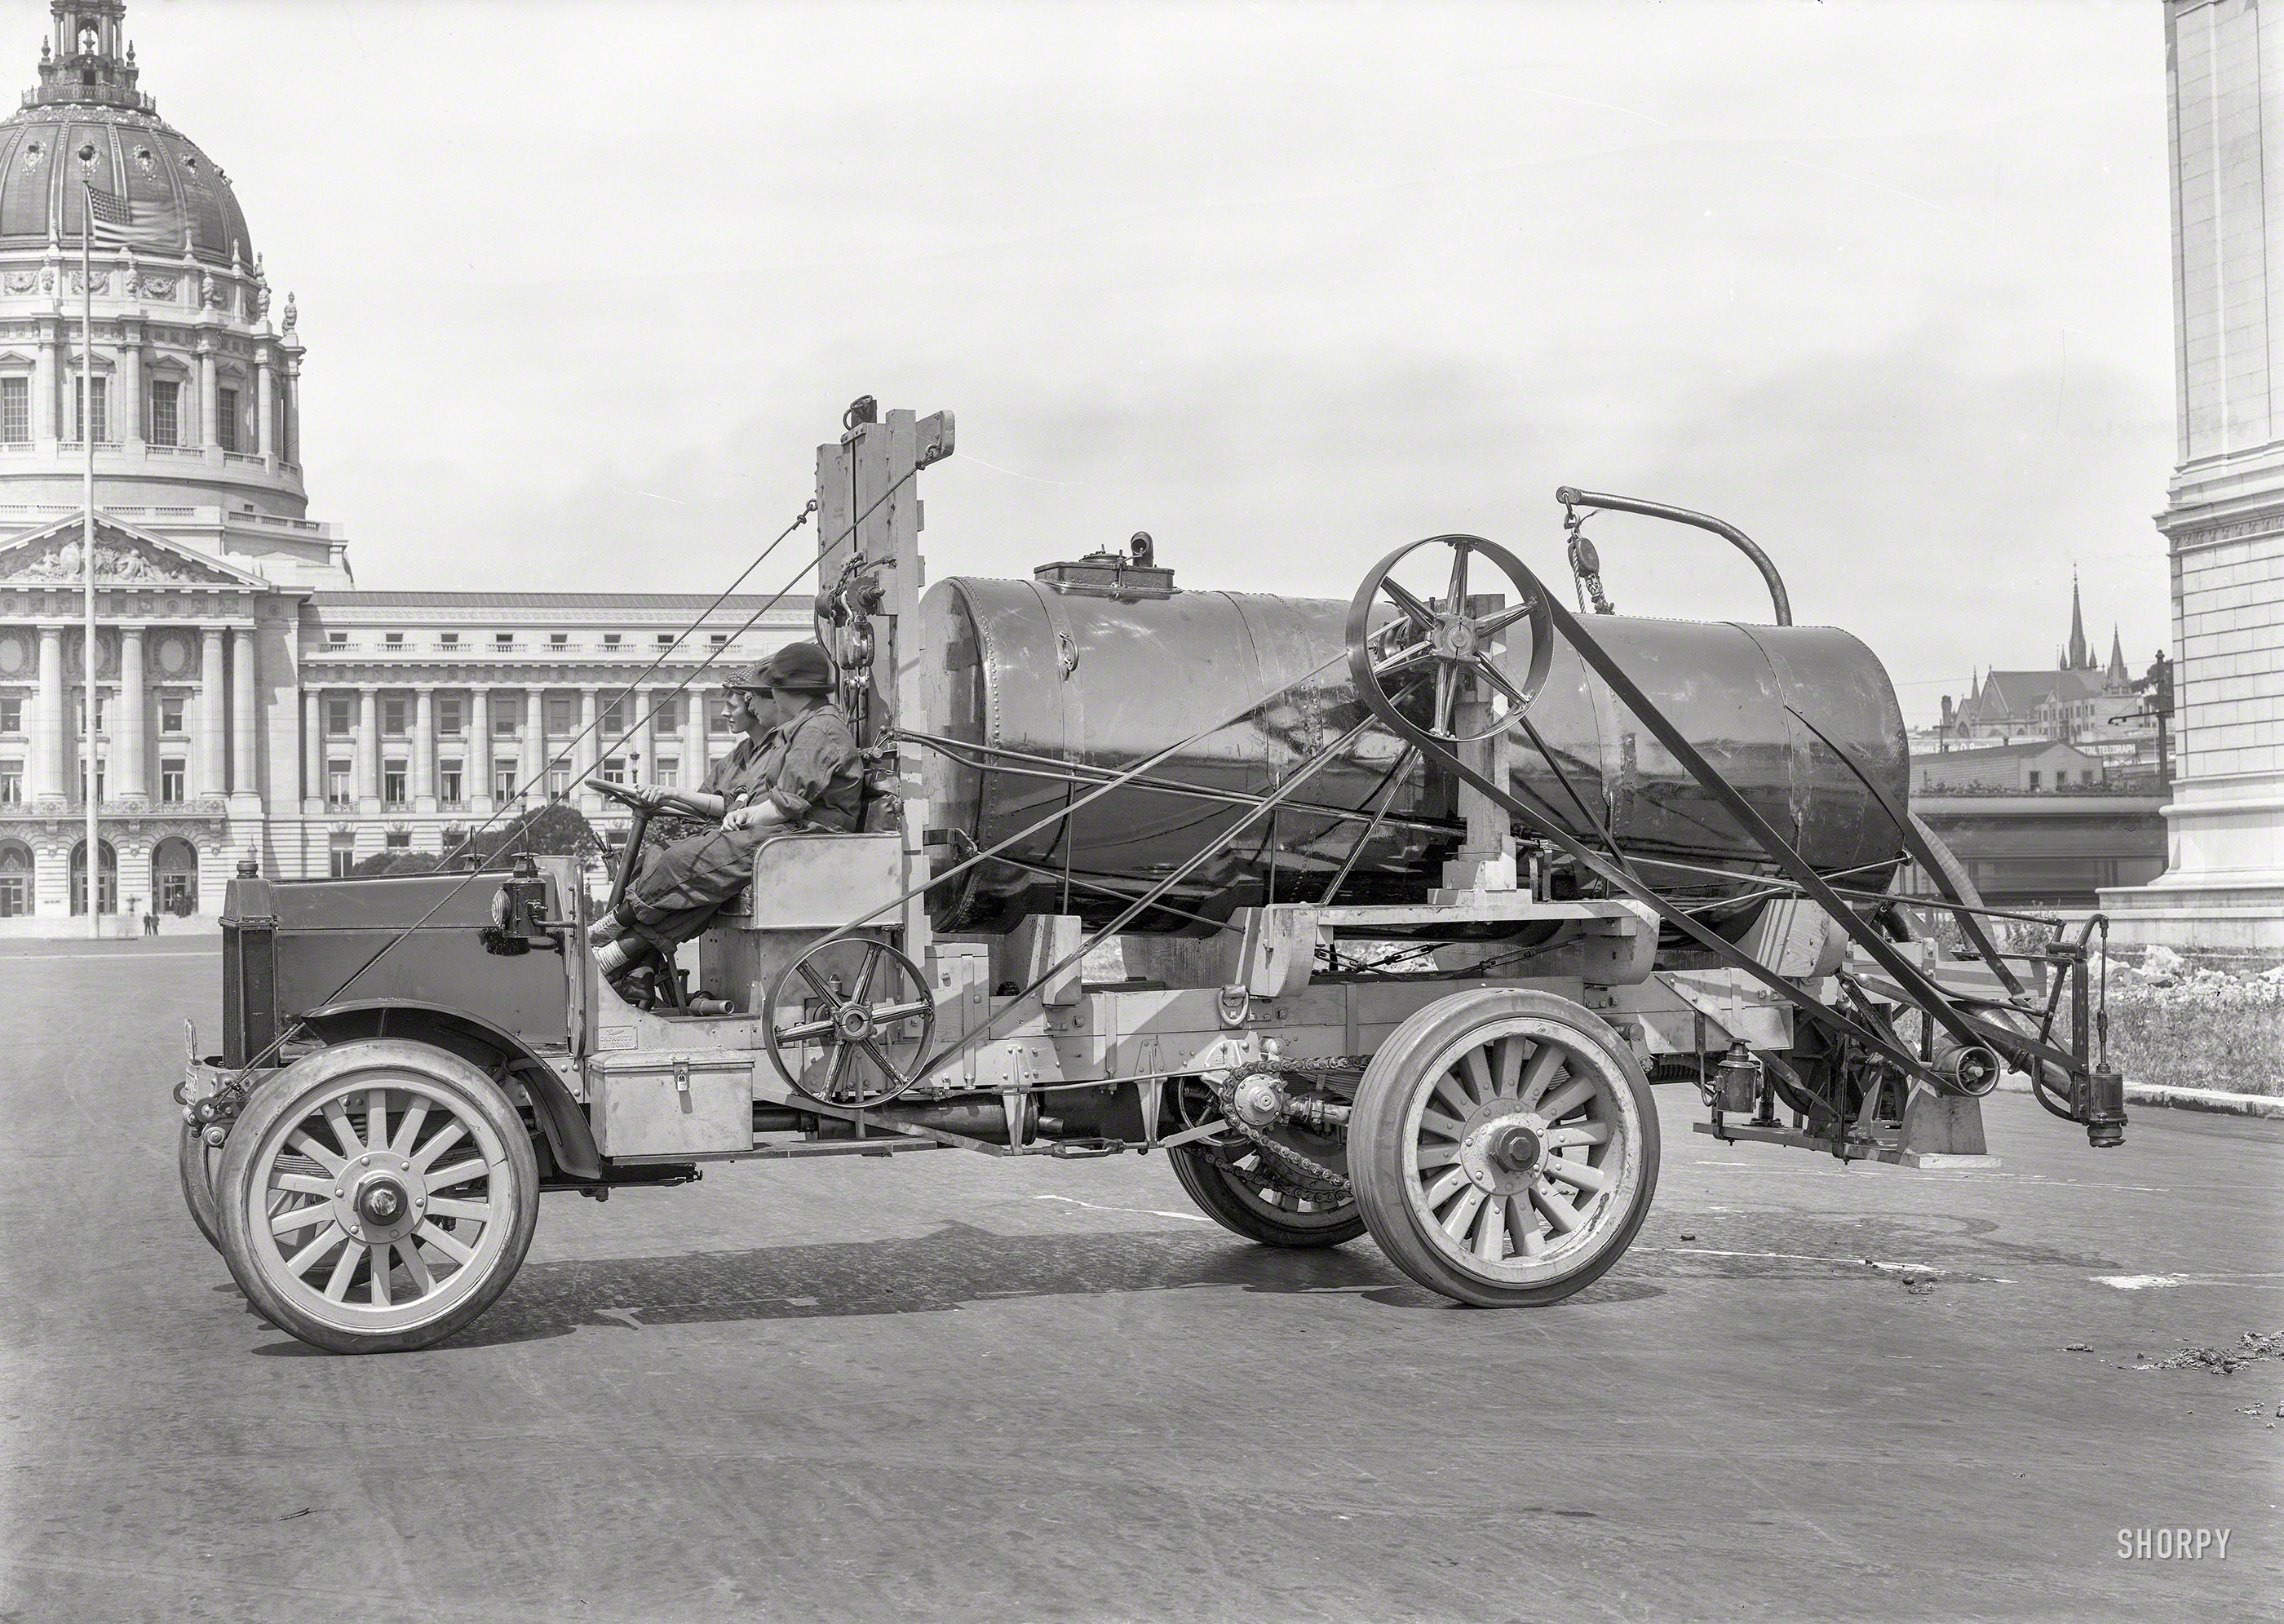 San Francisco City Hall circa 1919. "Peerless truck." Three young ladies aboard what seems to be some sort of street-cleaning, finger-ripping machine. Hide your children and stand clear! 5x7 glass negative by Christopher Helin. View full size.